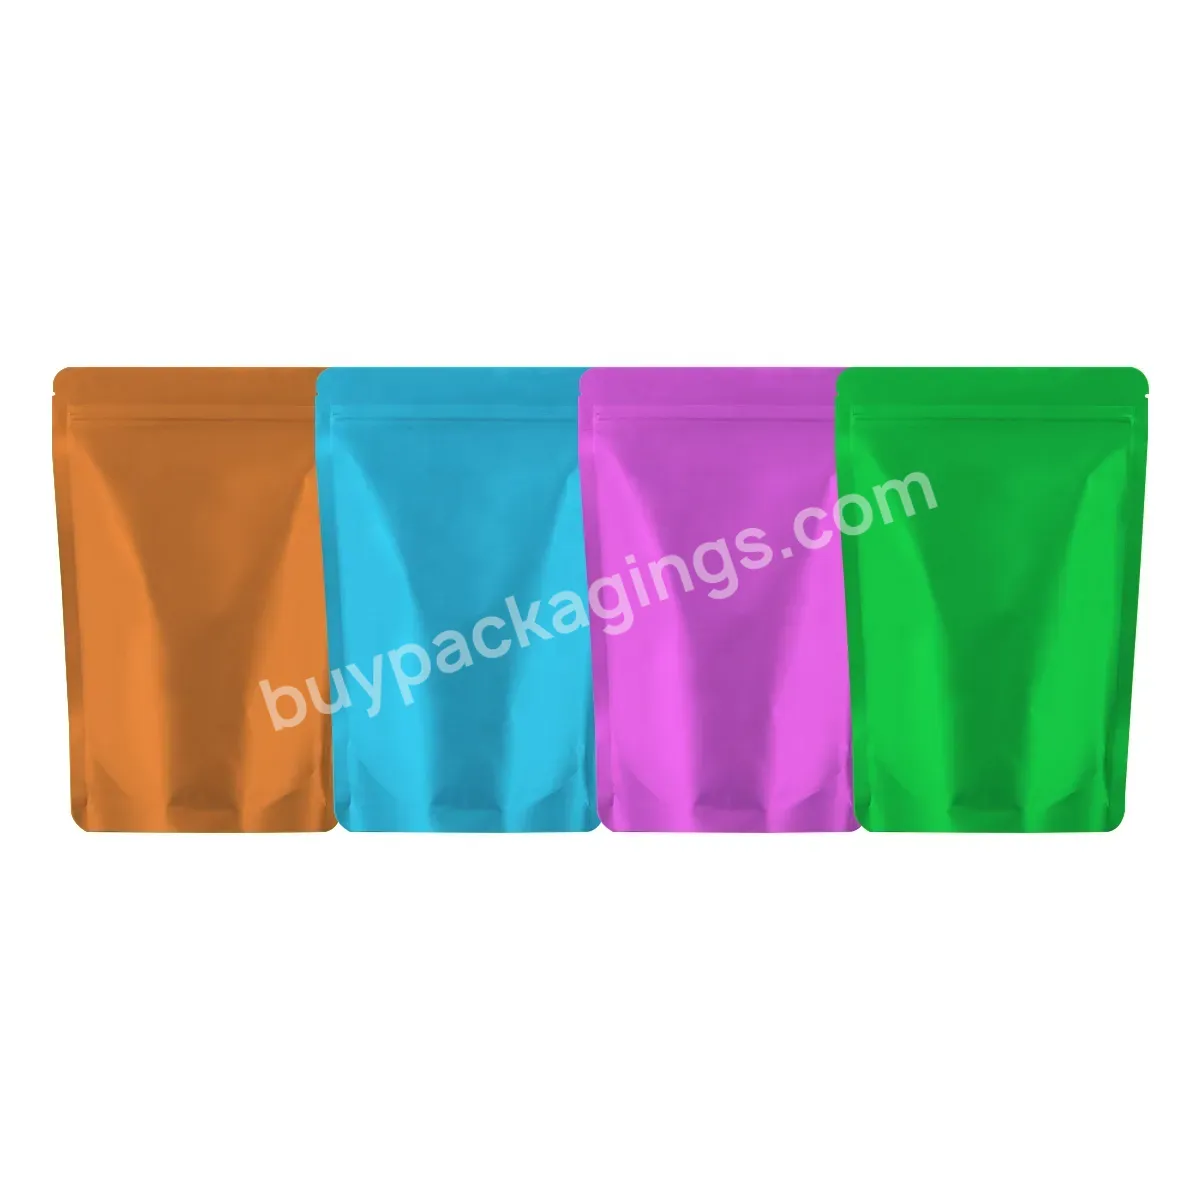 Holographic Custom Stand Up Zip Pouch Bag Holographic Bag Die Cut Childproof 3.5g Mylar Bag - Buy 3.5g Mylar Bag,Custom Stand Up Zip Pouch Bag,Die Cut Childproof.